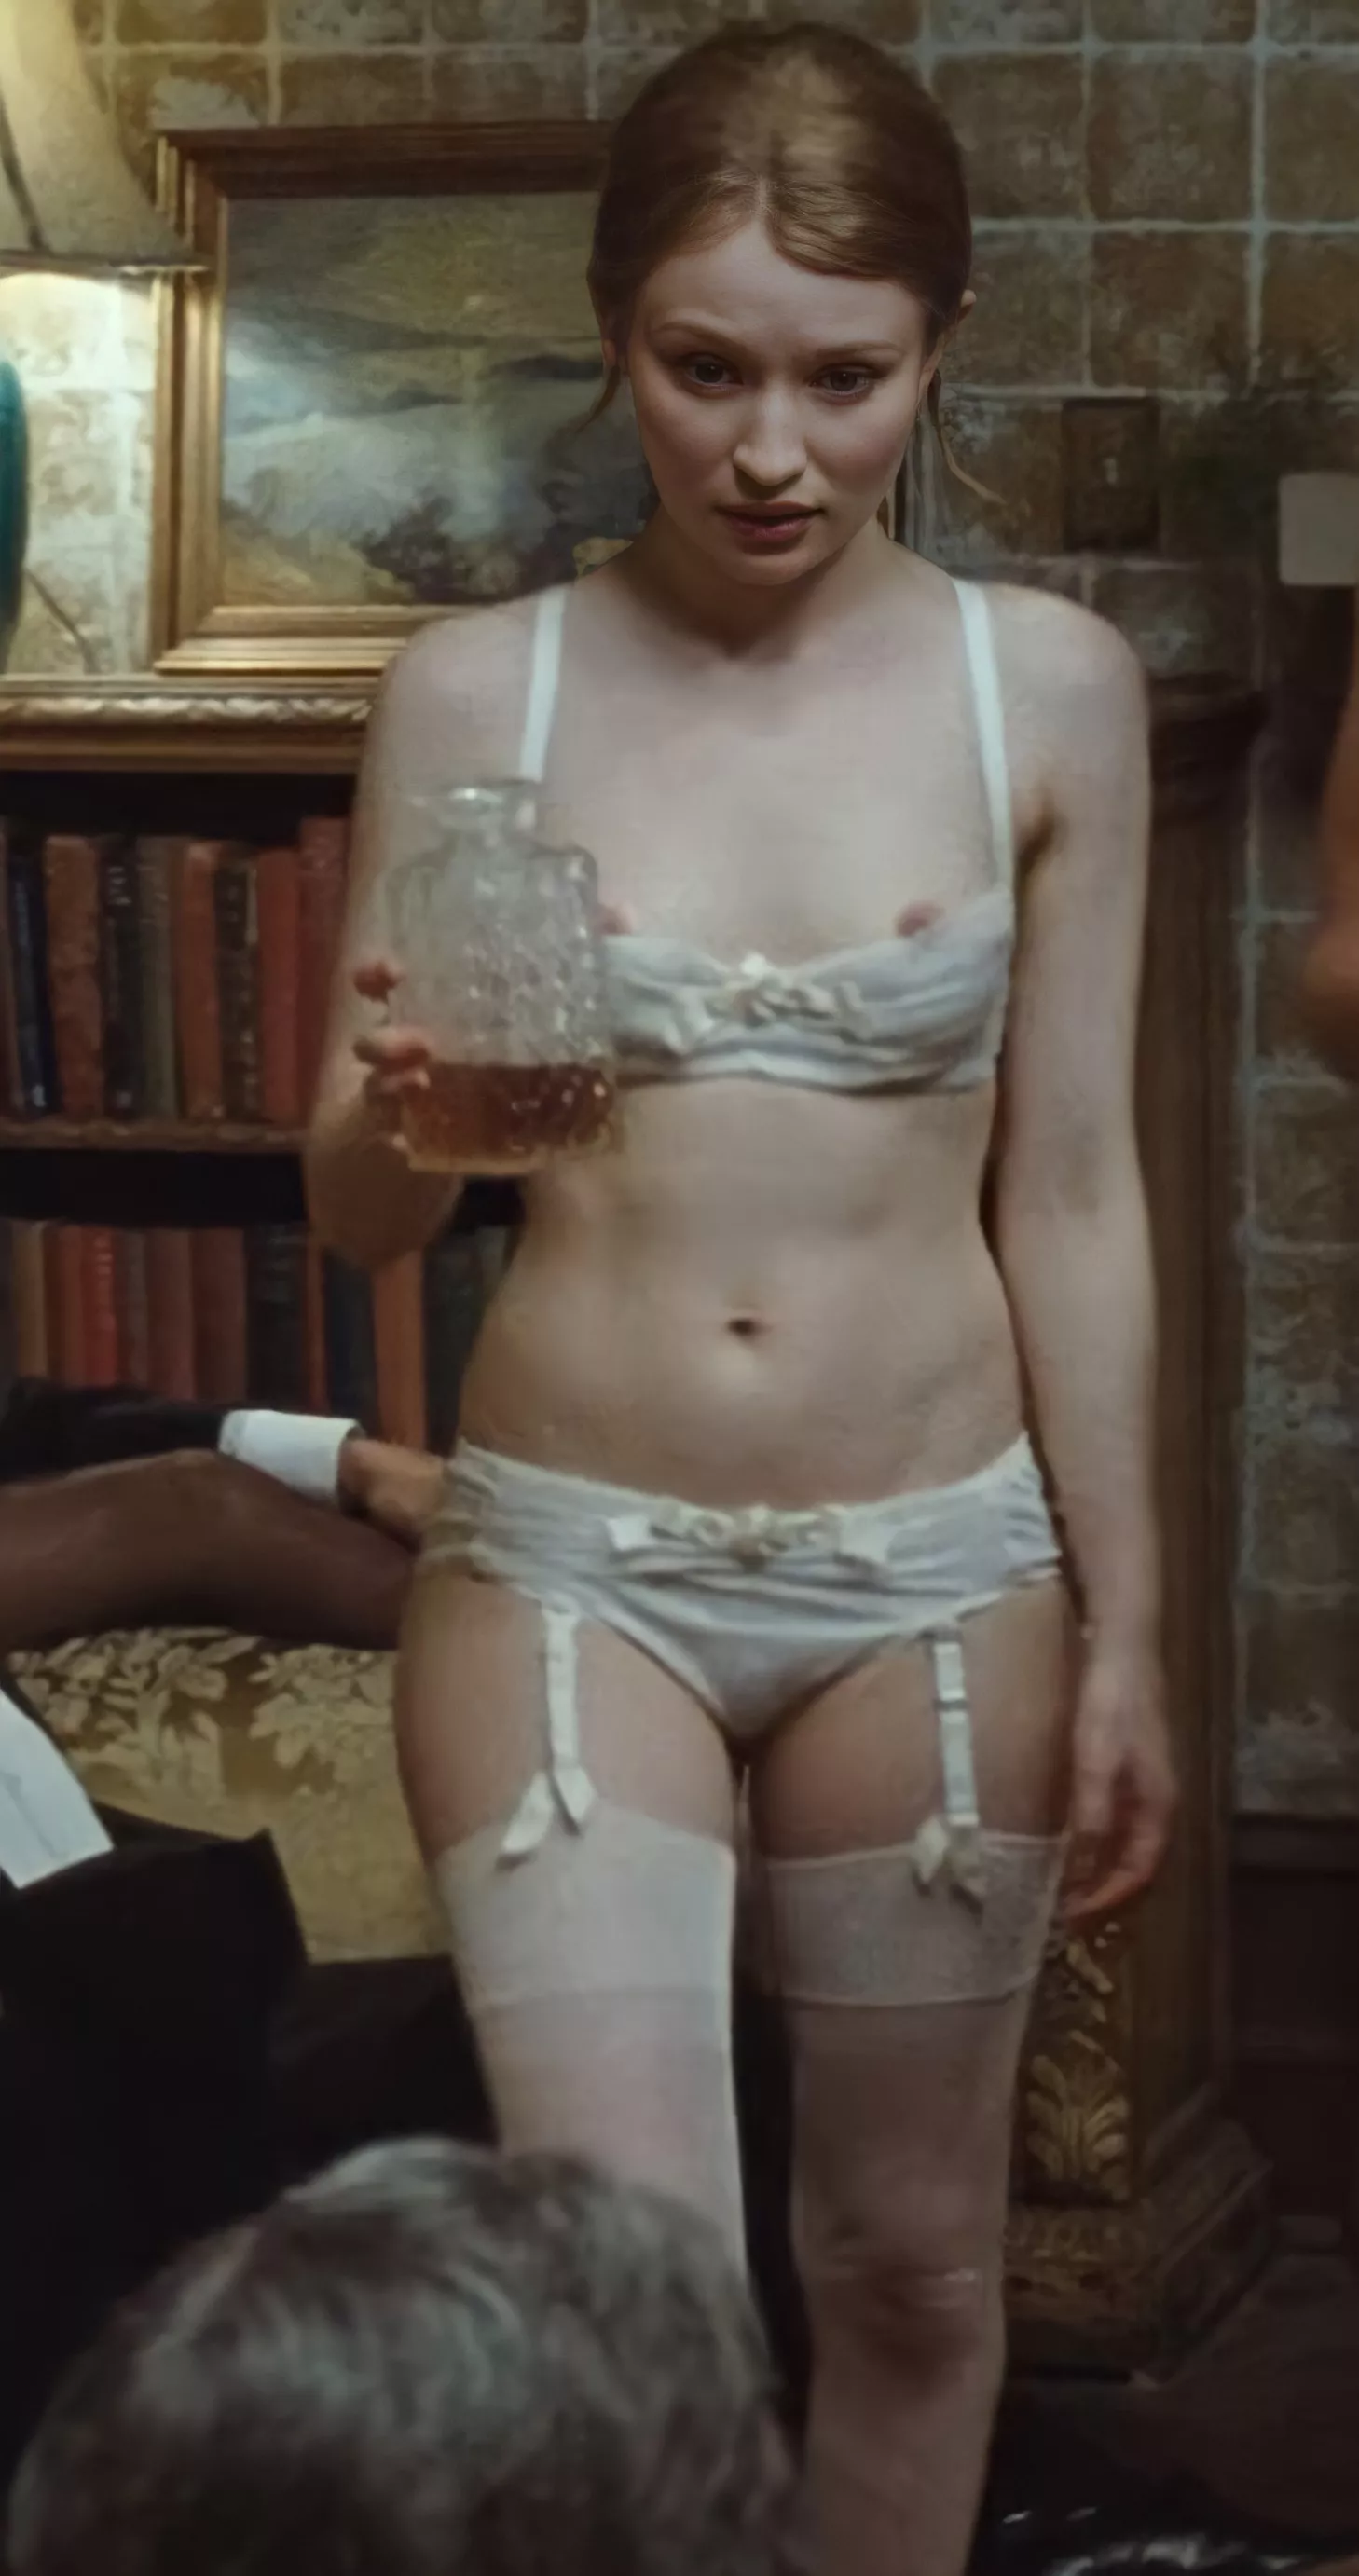 Pics browning nude of emily Emily Browning